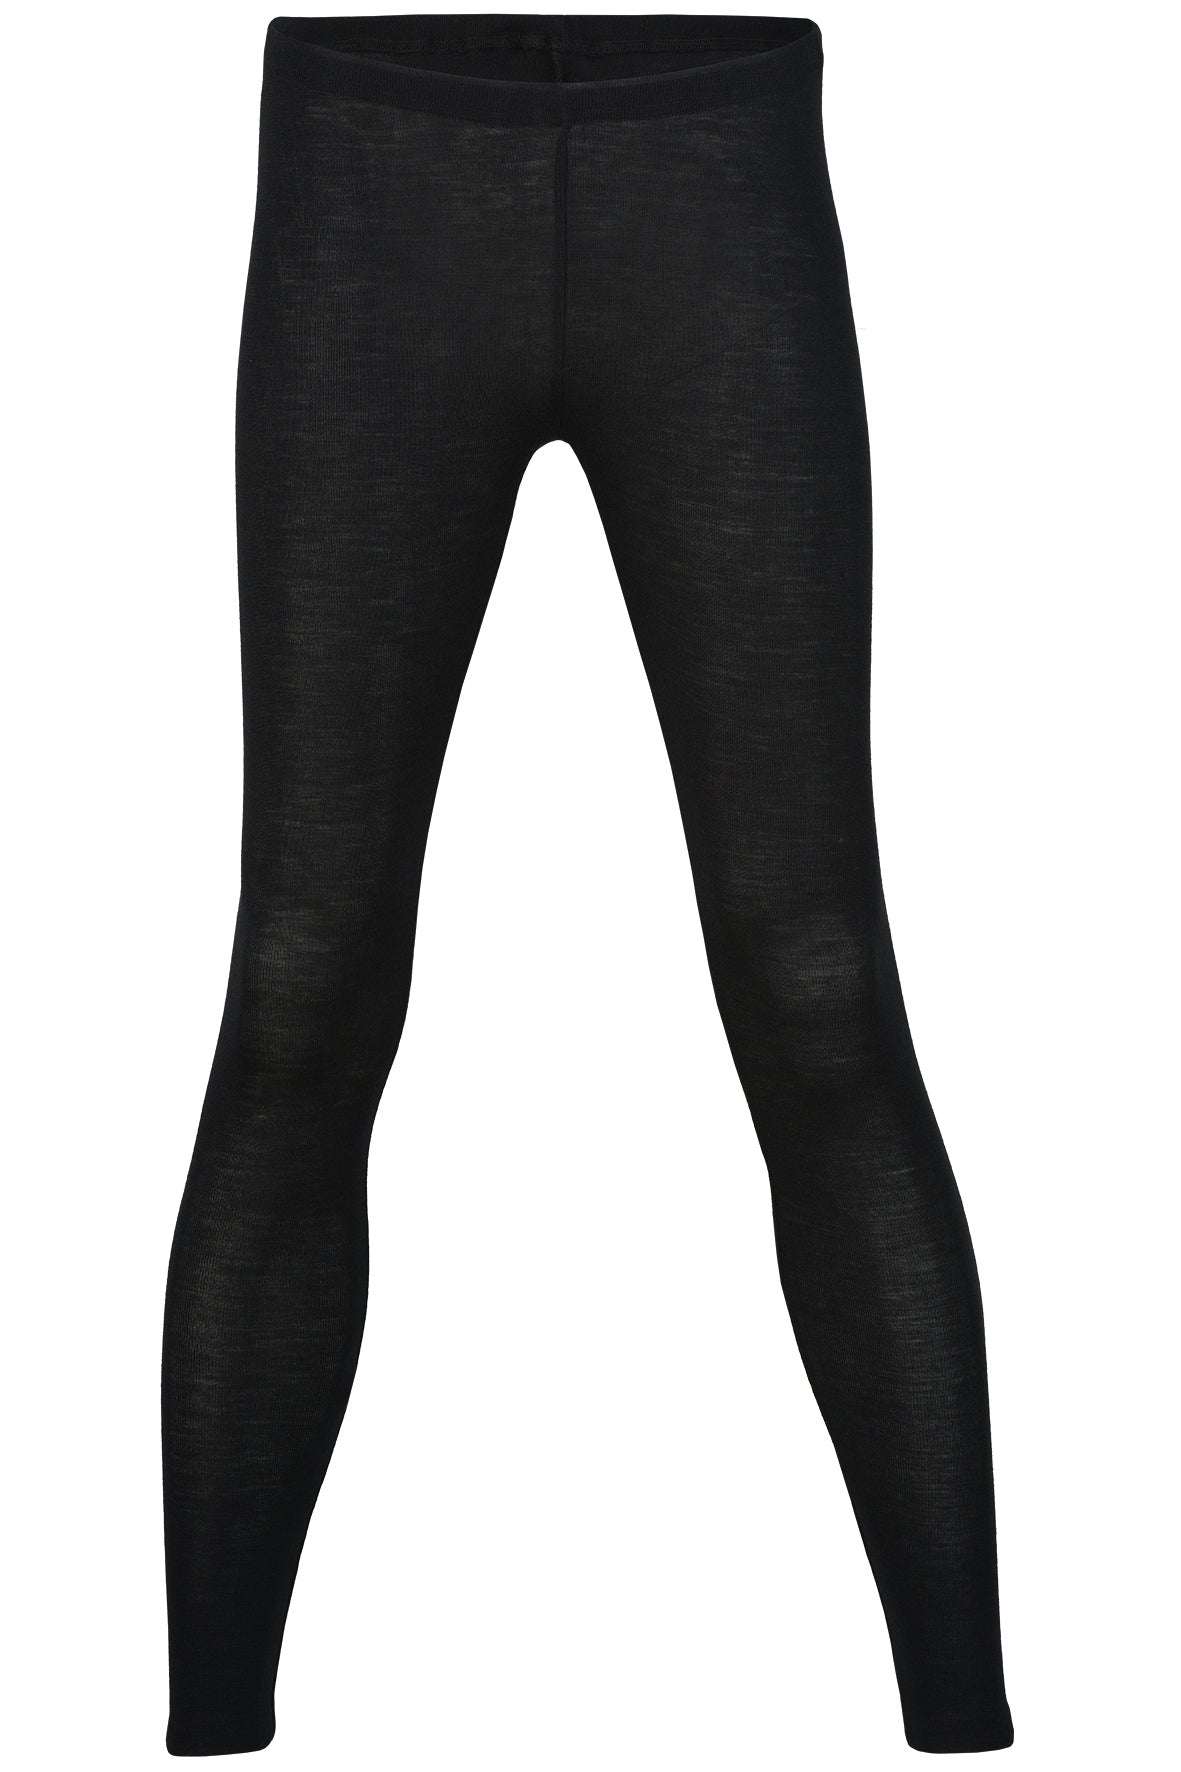  Women's Leggings - Silk / Women's Leggings / Women's Clothing:  Clothing, Shoes & Jewelry